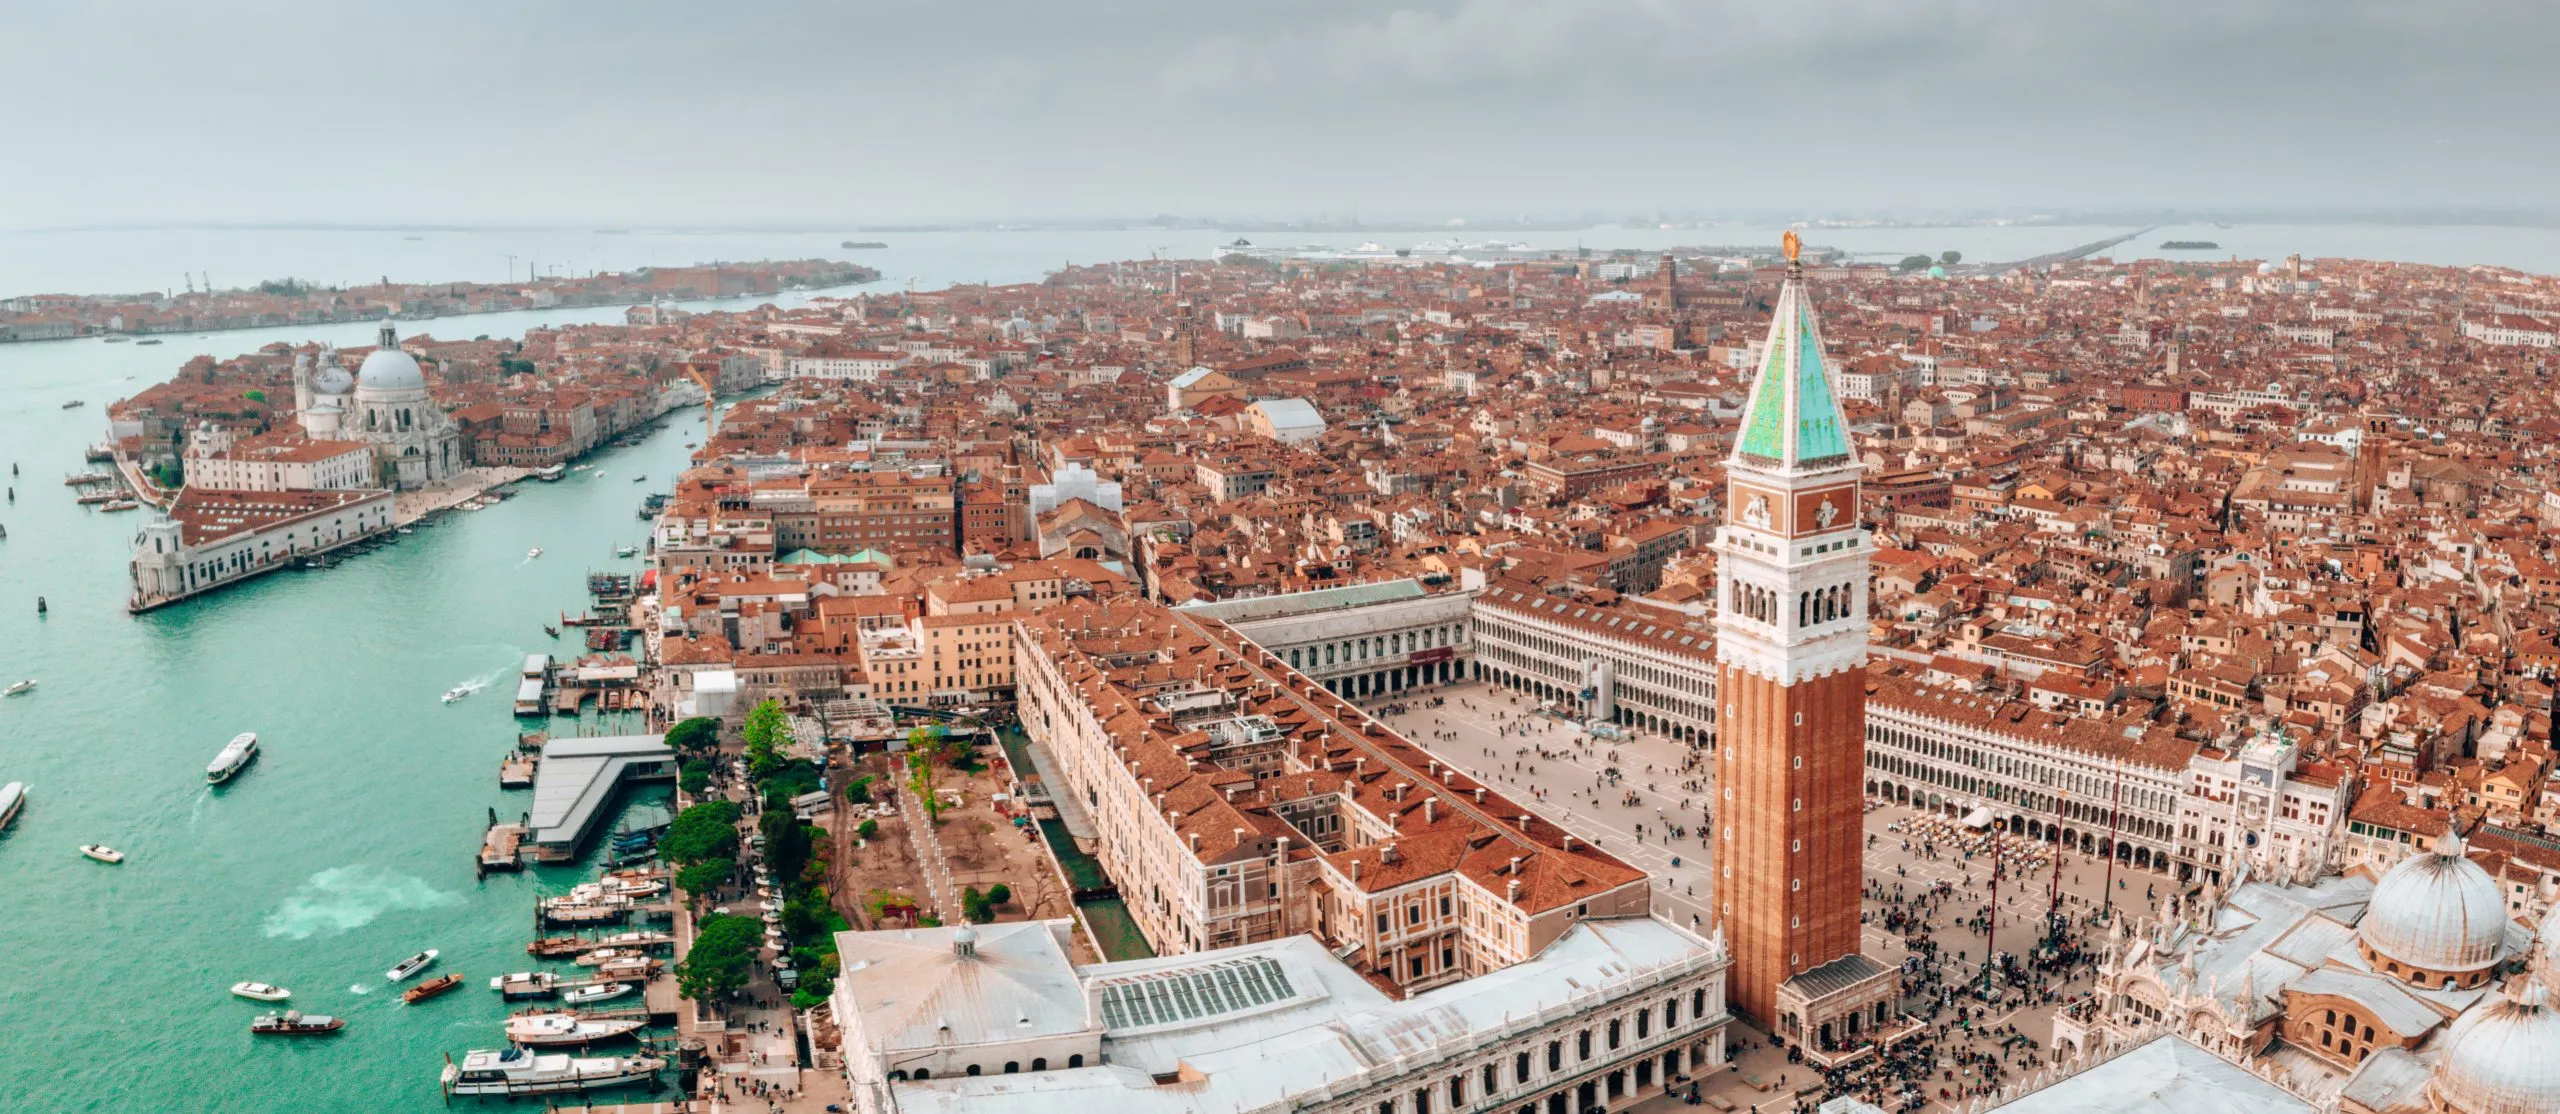 Aerial beautiful view over San Marco square in Venice, Italy